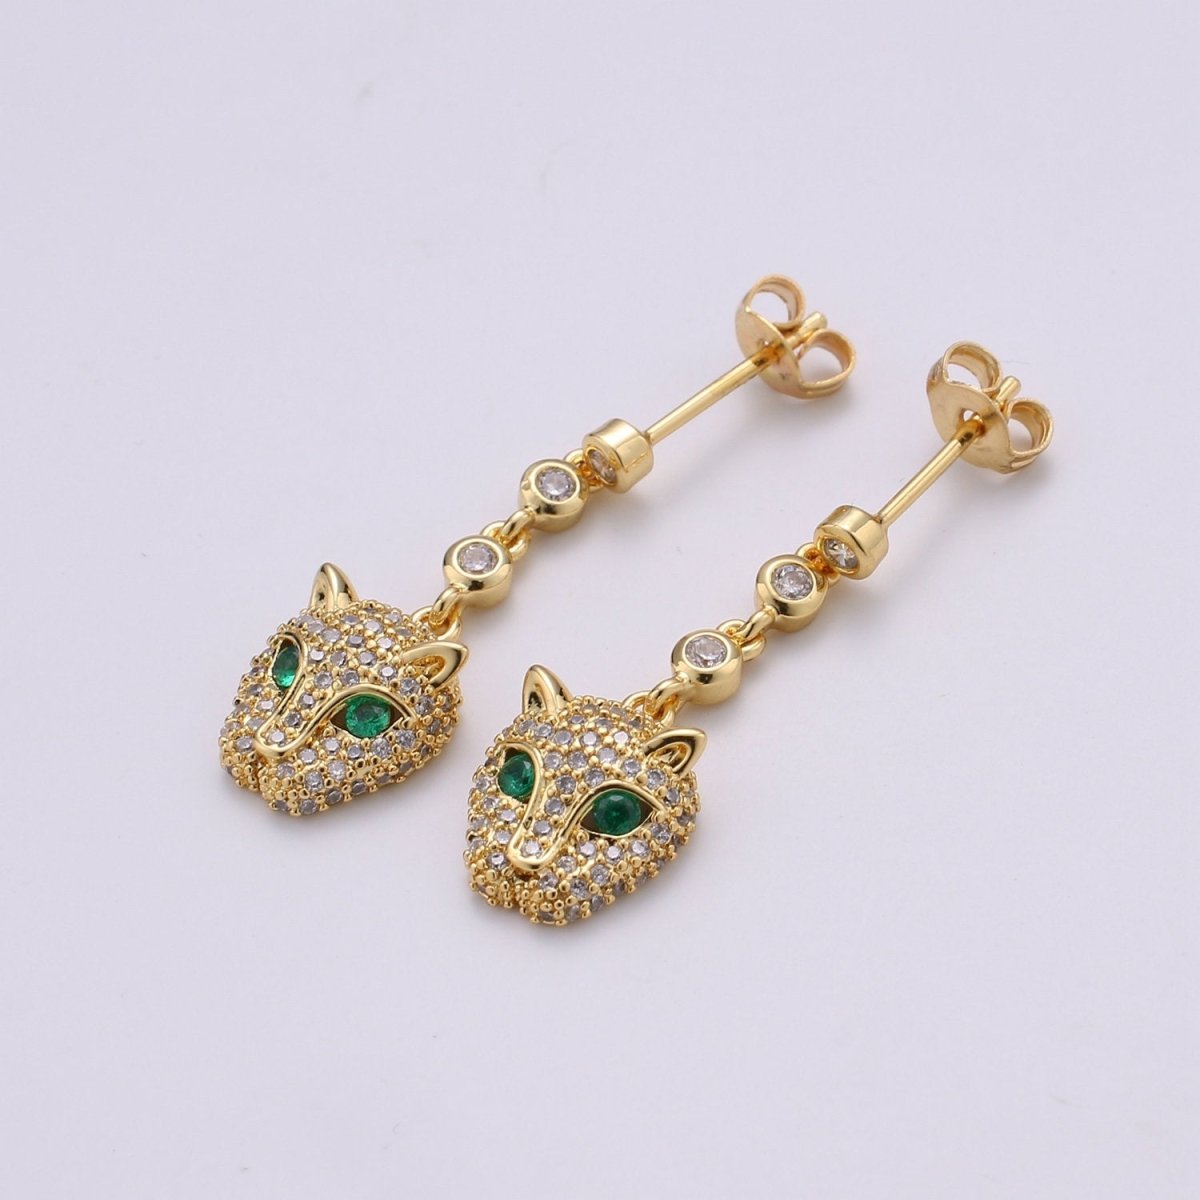 OS Wild Leopard Pierce Earring Gold Vermeil Stud Earring Dazzling Micro Pave Cubic Zironia Jewerly Dangle Earring for Christmas Gift Idea Q-300 - DLUXCA